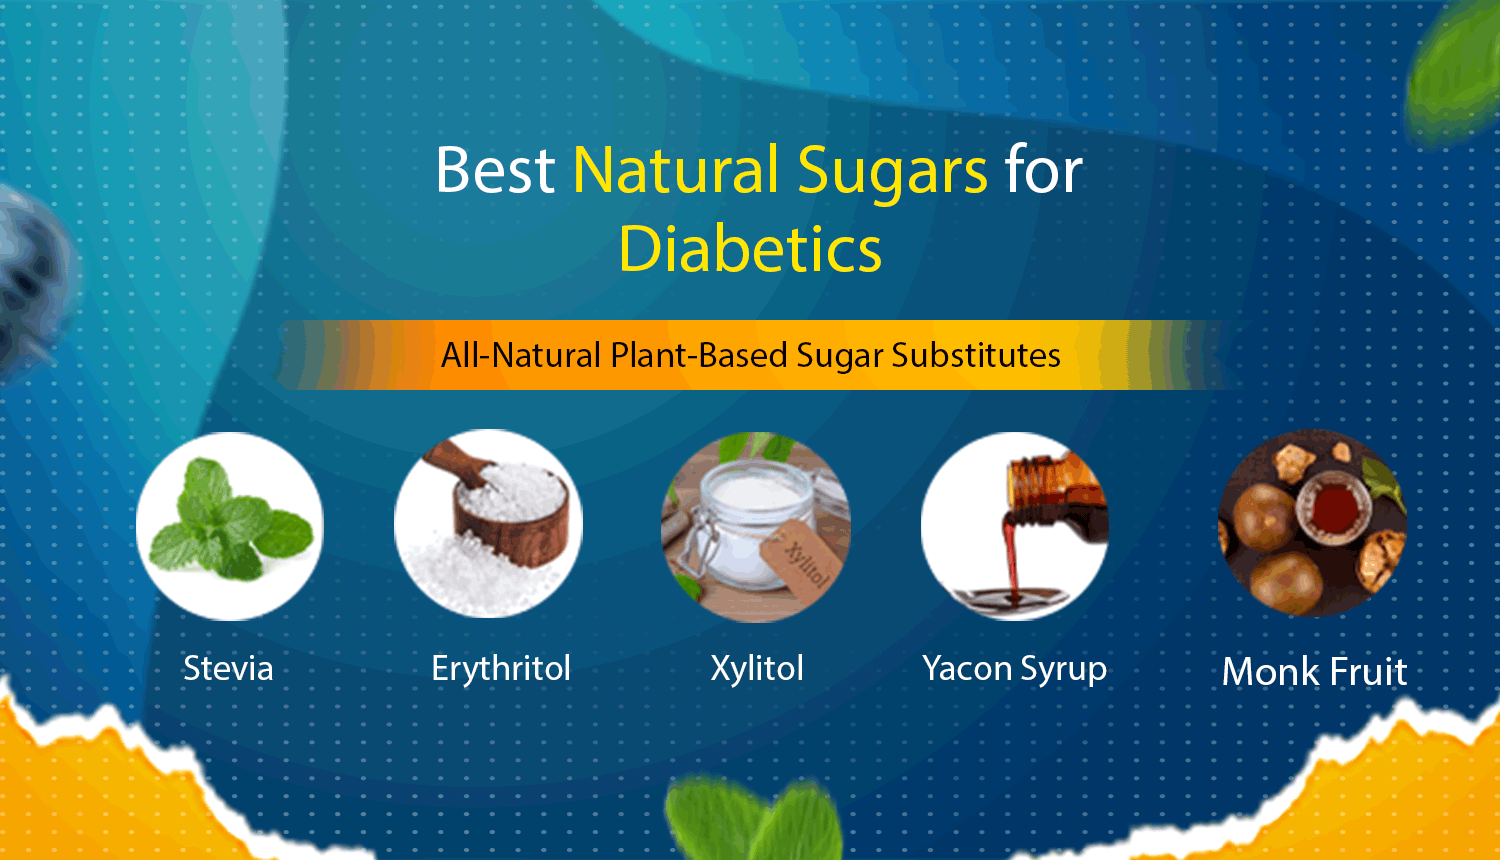 Which are the Best Sugar Substitutes for Diabetics?